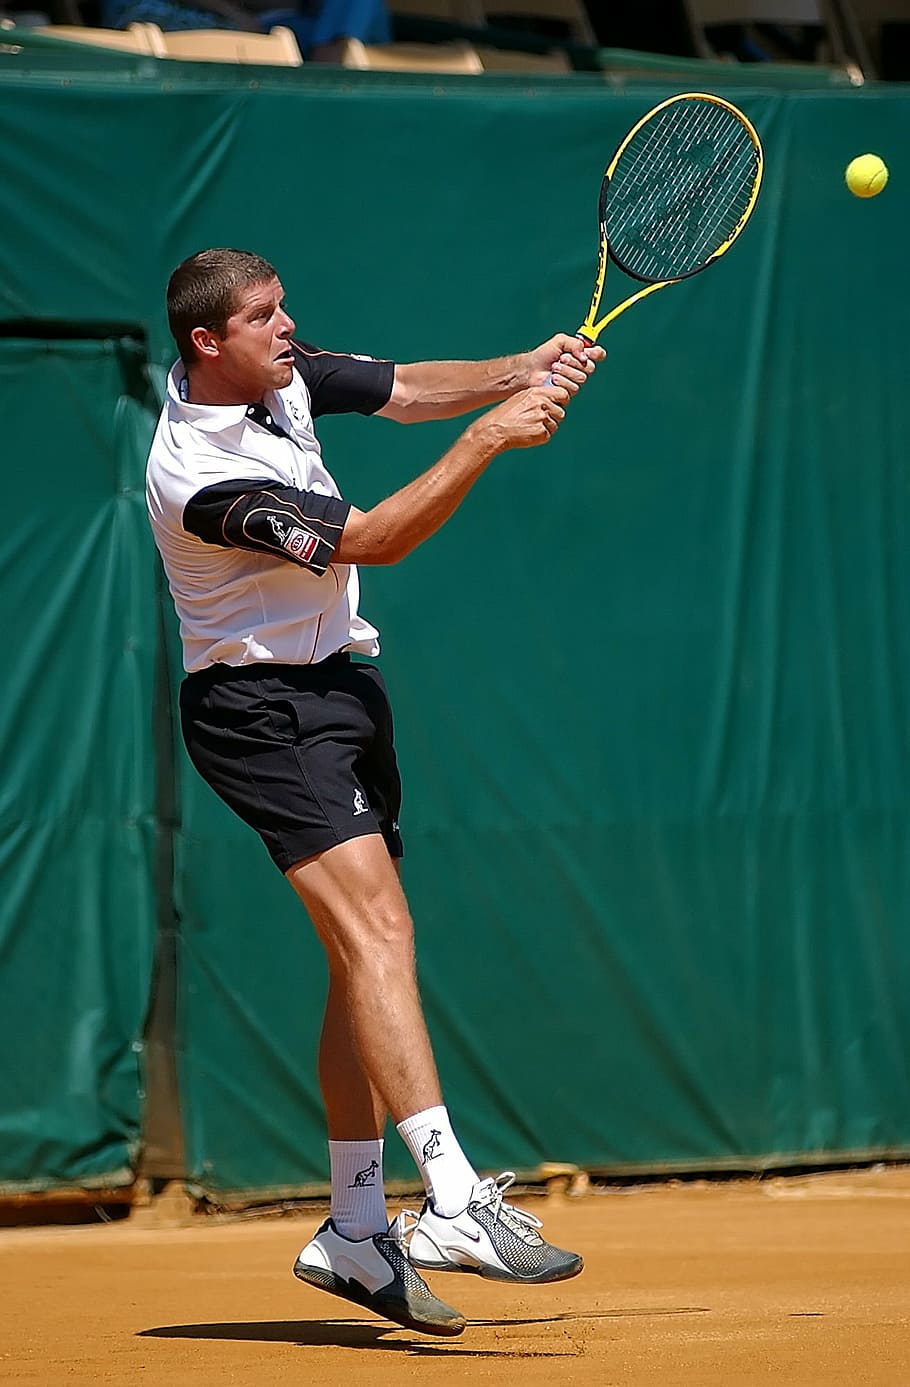 man, playing, tennis, daytime, player, competition, racket, game, court, play